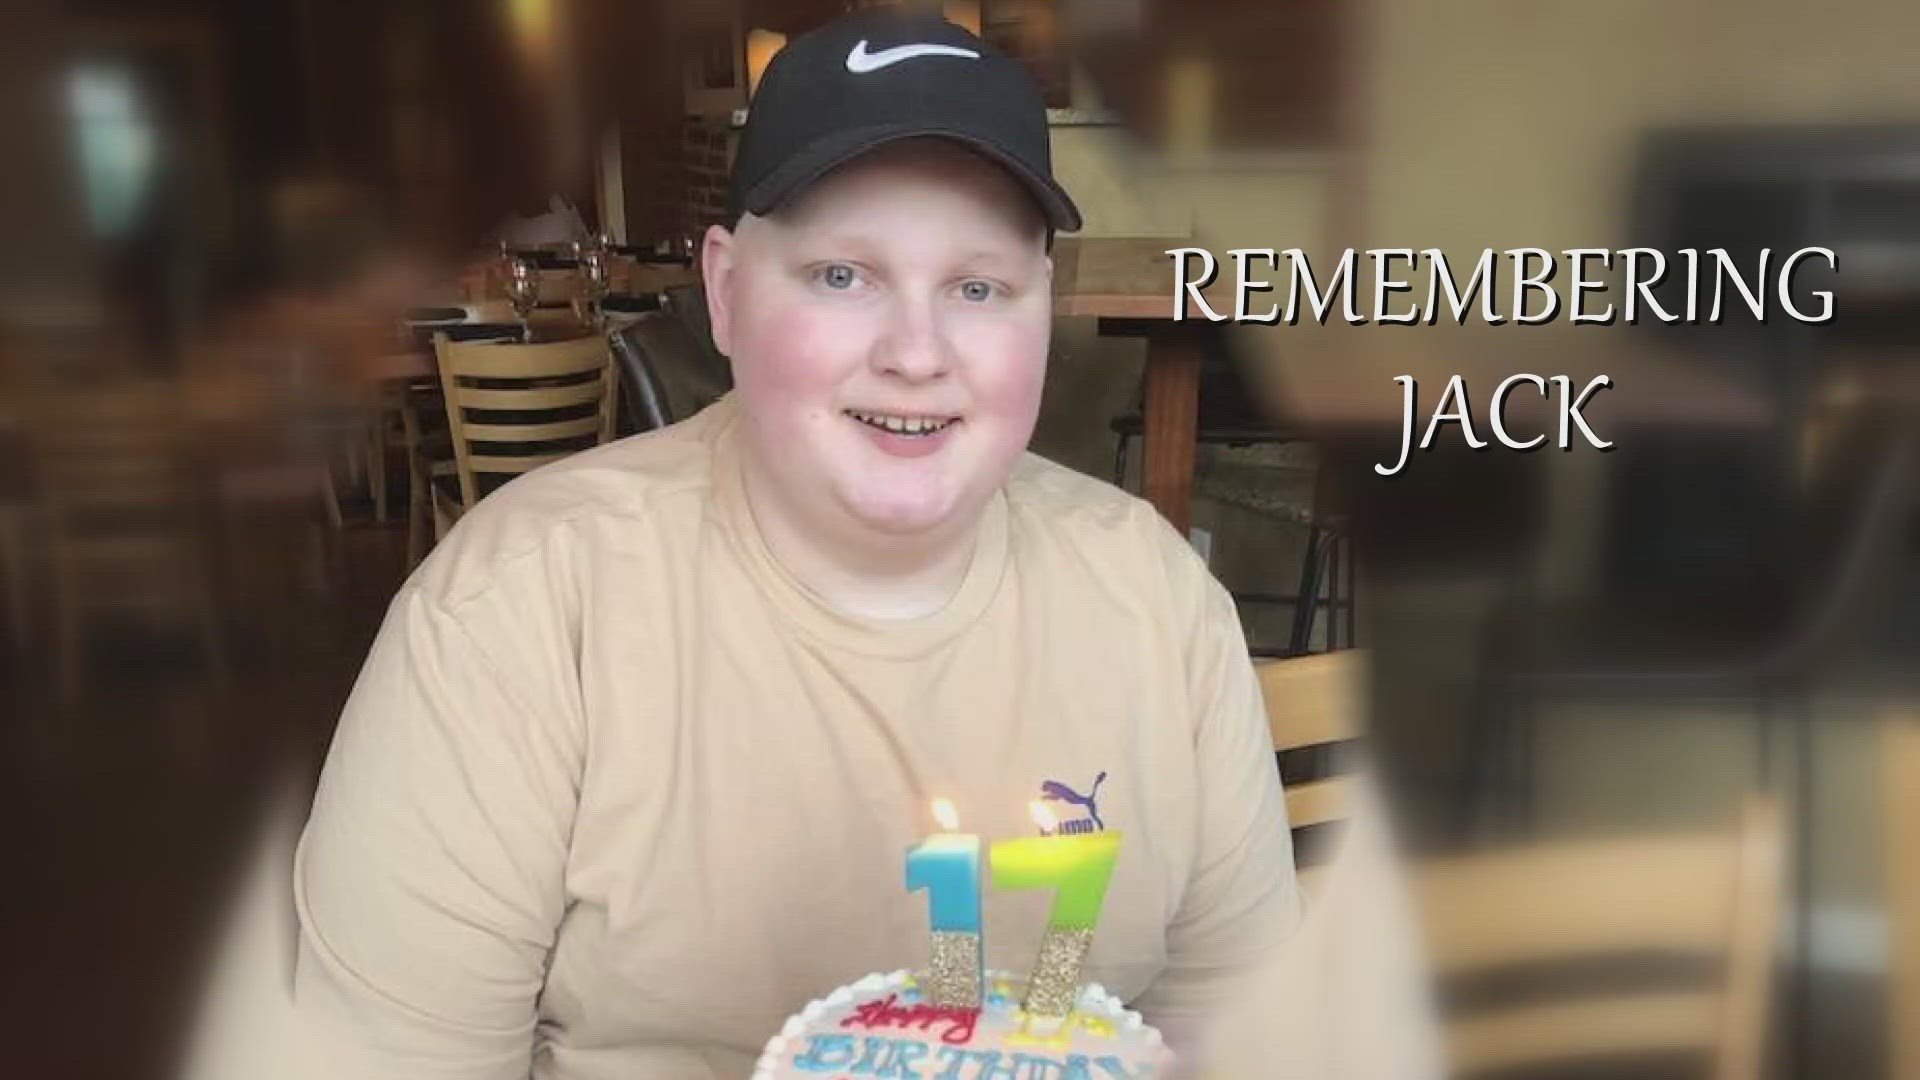 Following an 18-month battle with Ewing sarcoma, 17-year-old Mentor High School student Jack Sawyer passed away Sunday.